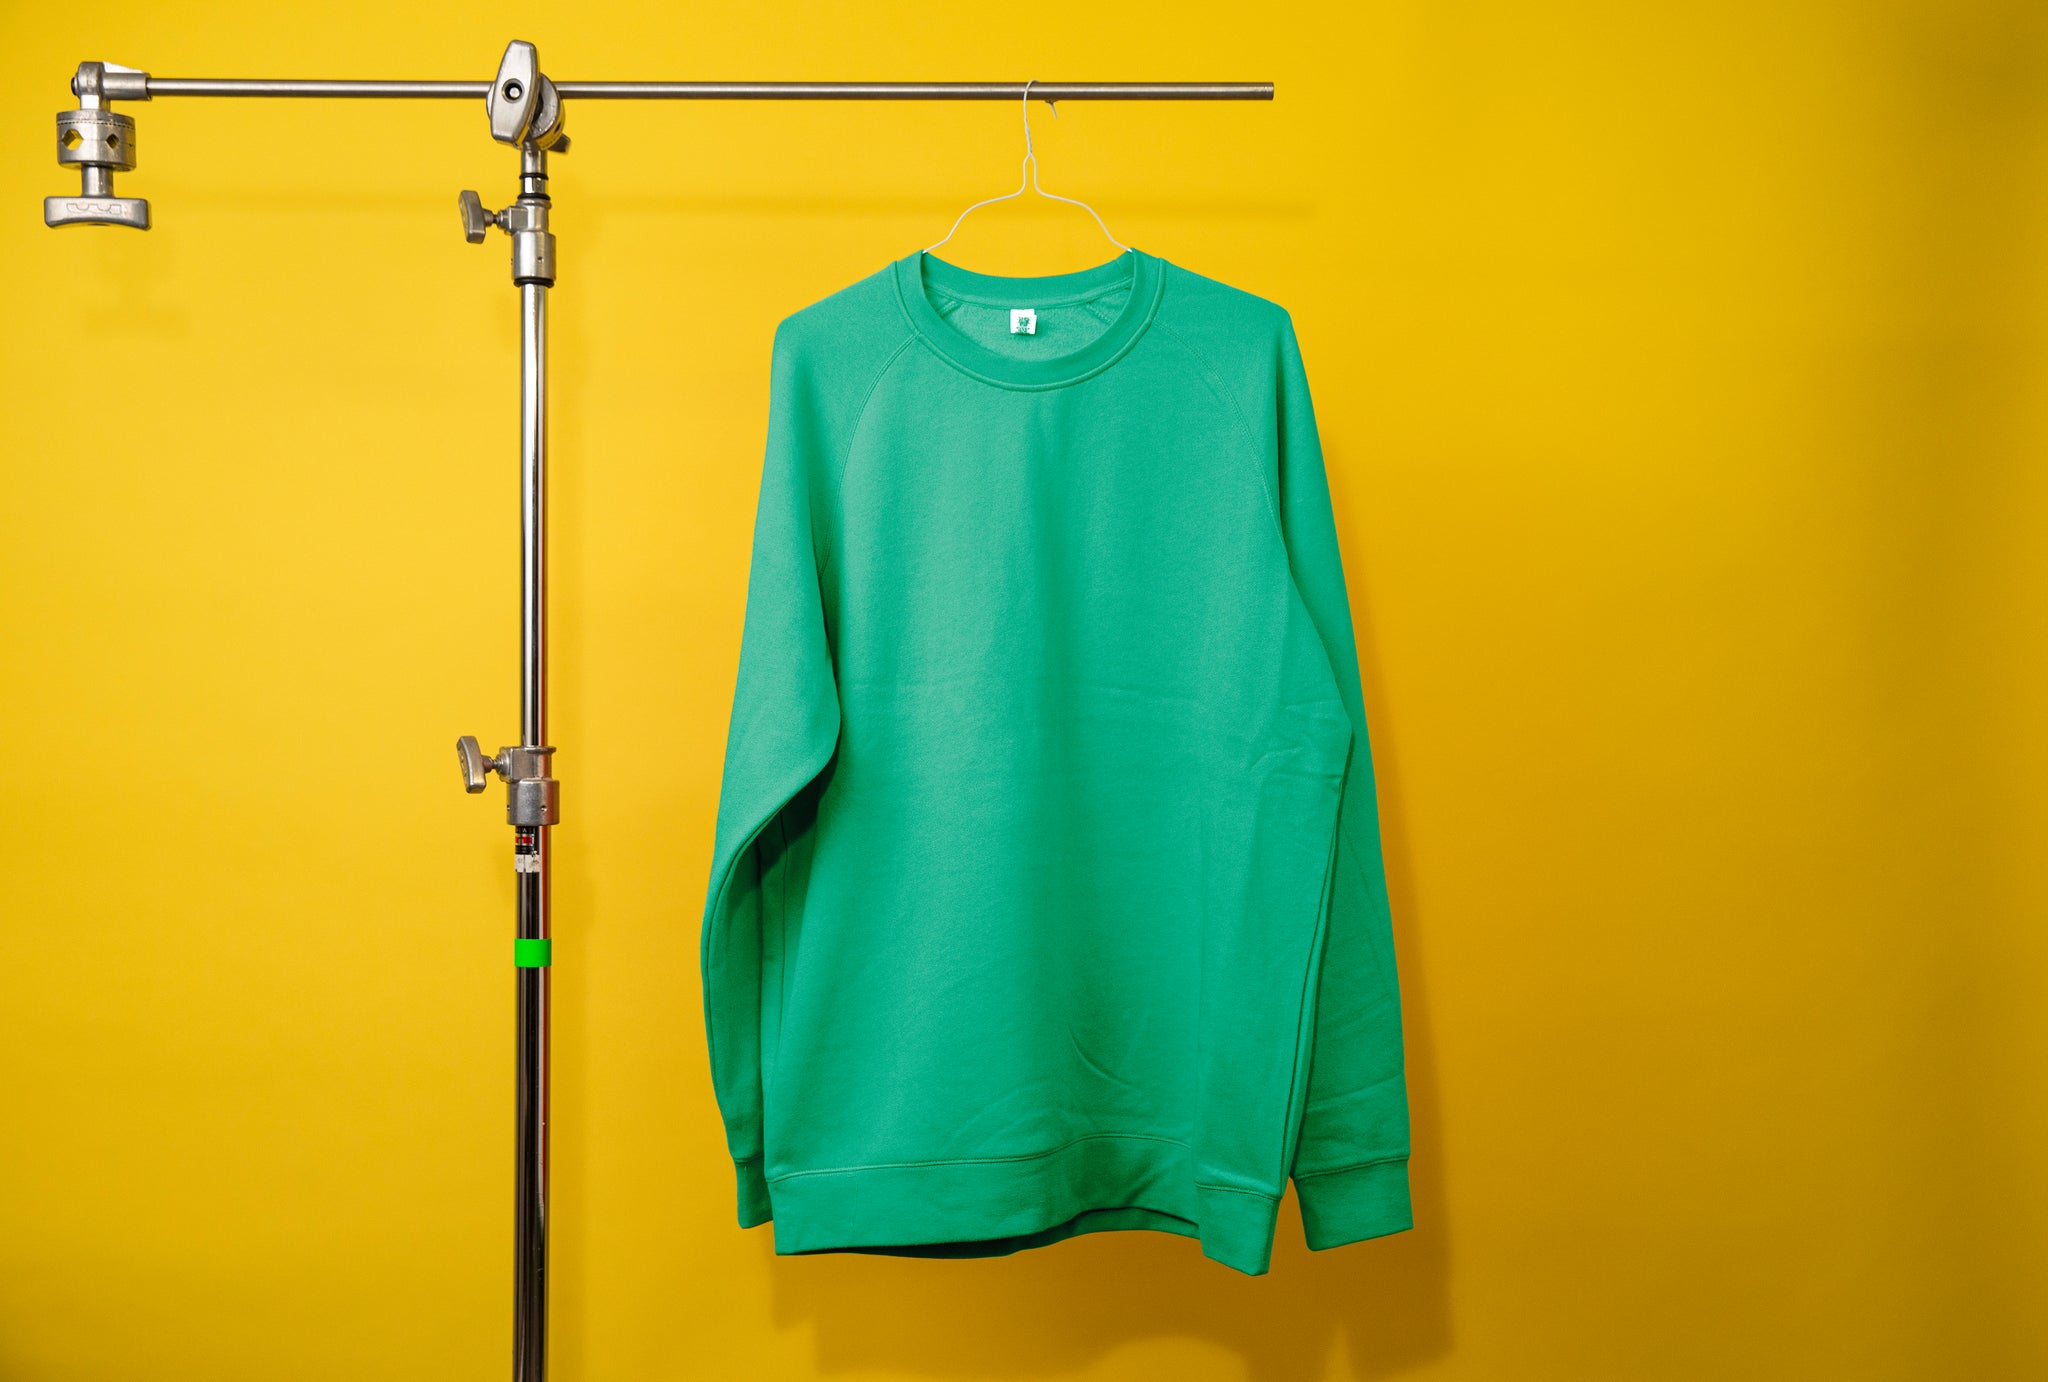 Photography c-stand holding a bright green jumper. Background is a bright yellow. 